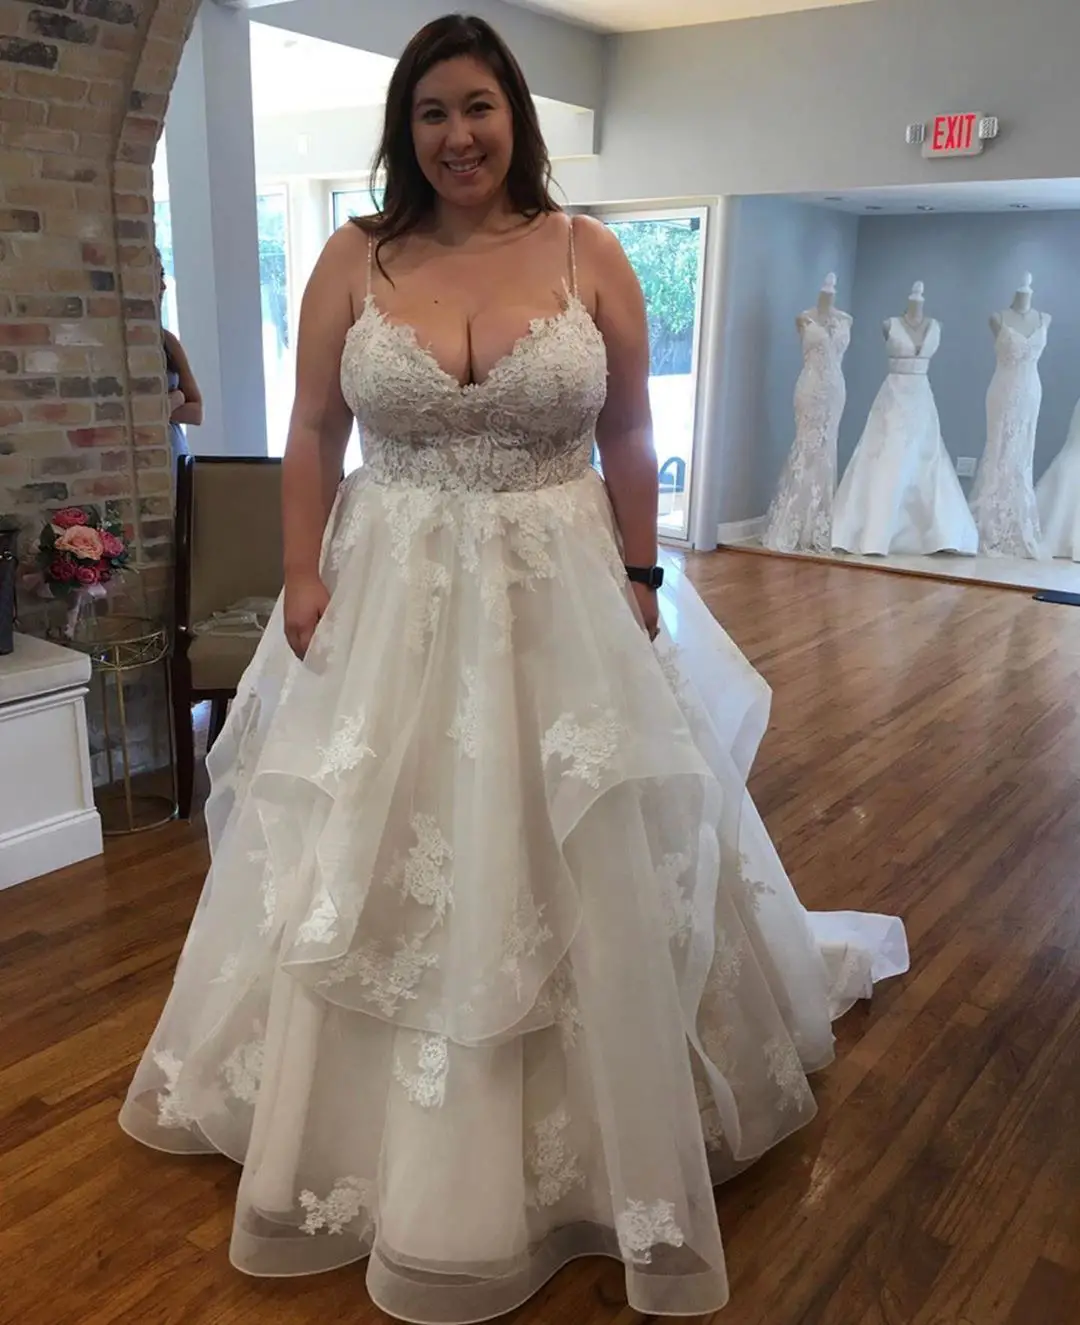 Plus Size Bride Magazine on Instagram: Perfectly imperfect @curvy_me ...